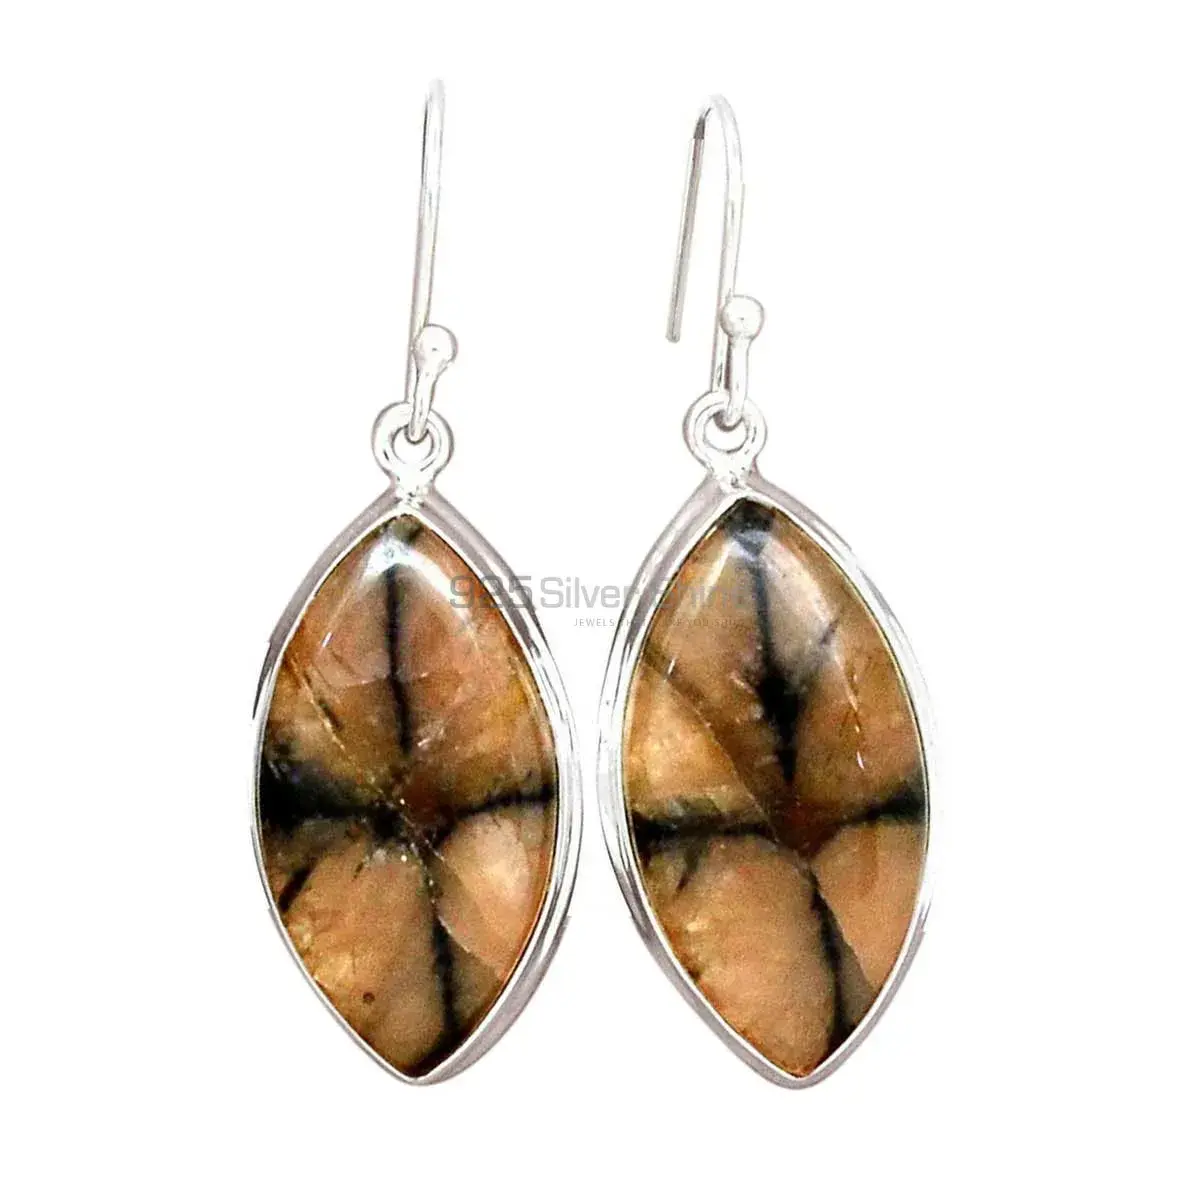 Affordable 925 Sterling Silver Handmade Earrings Manufacturer In Chiastolite Gemstone Jewelry 925SE2748_6